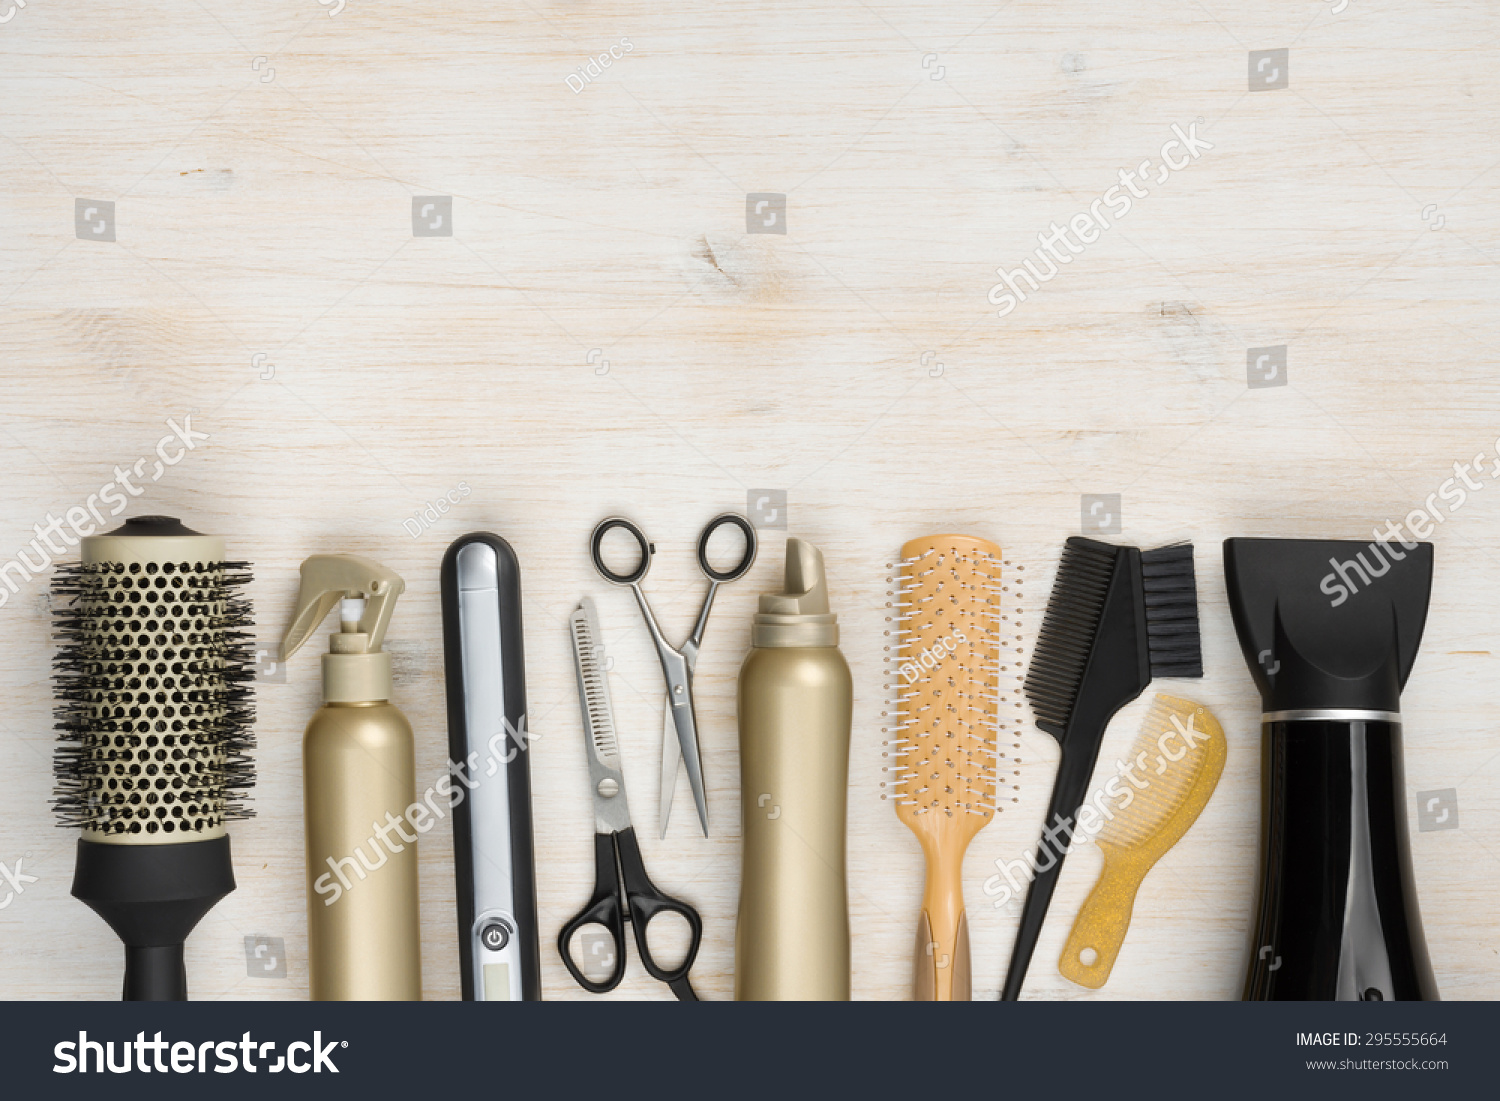 Hairdressing tools on wooden background with copy space at top #295555664